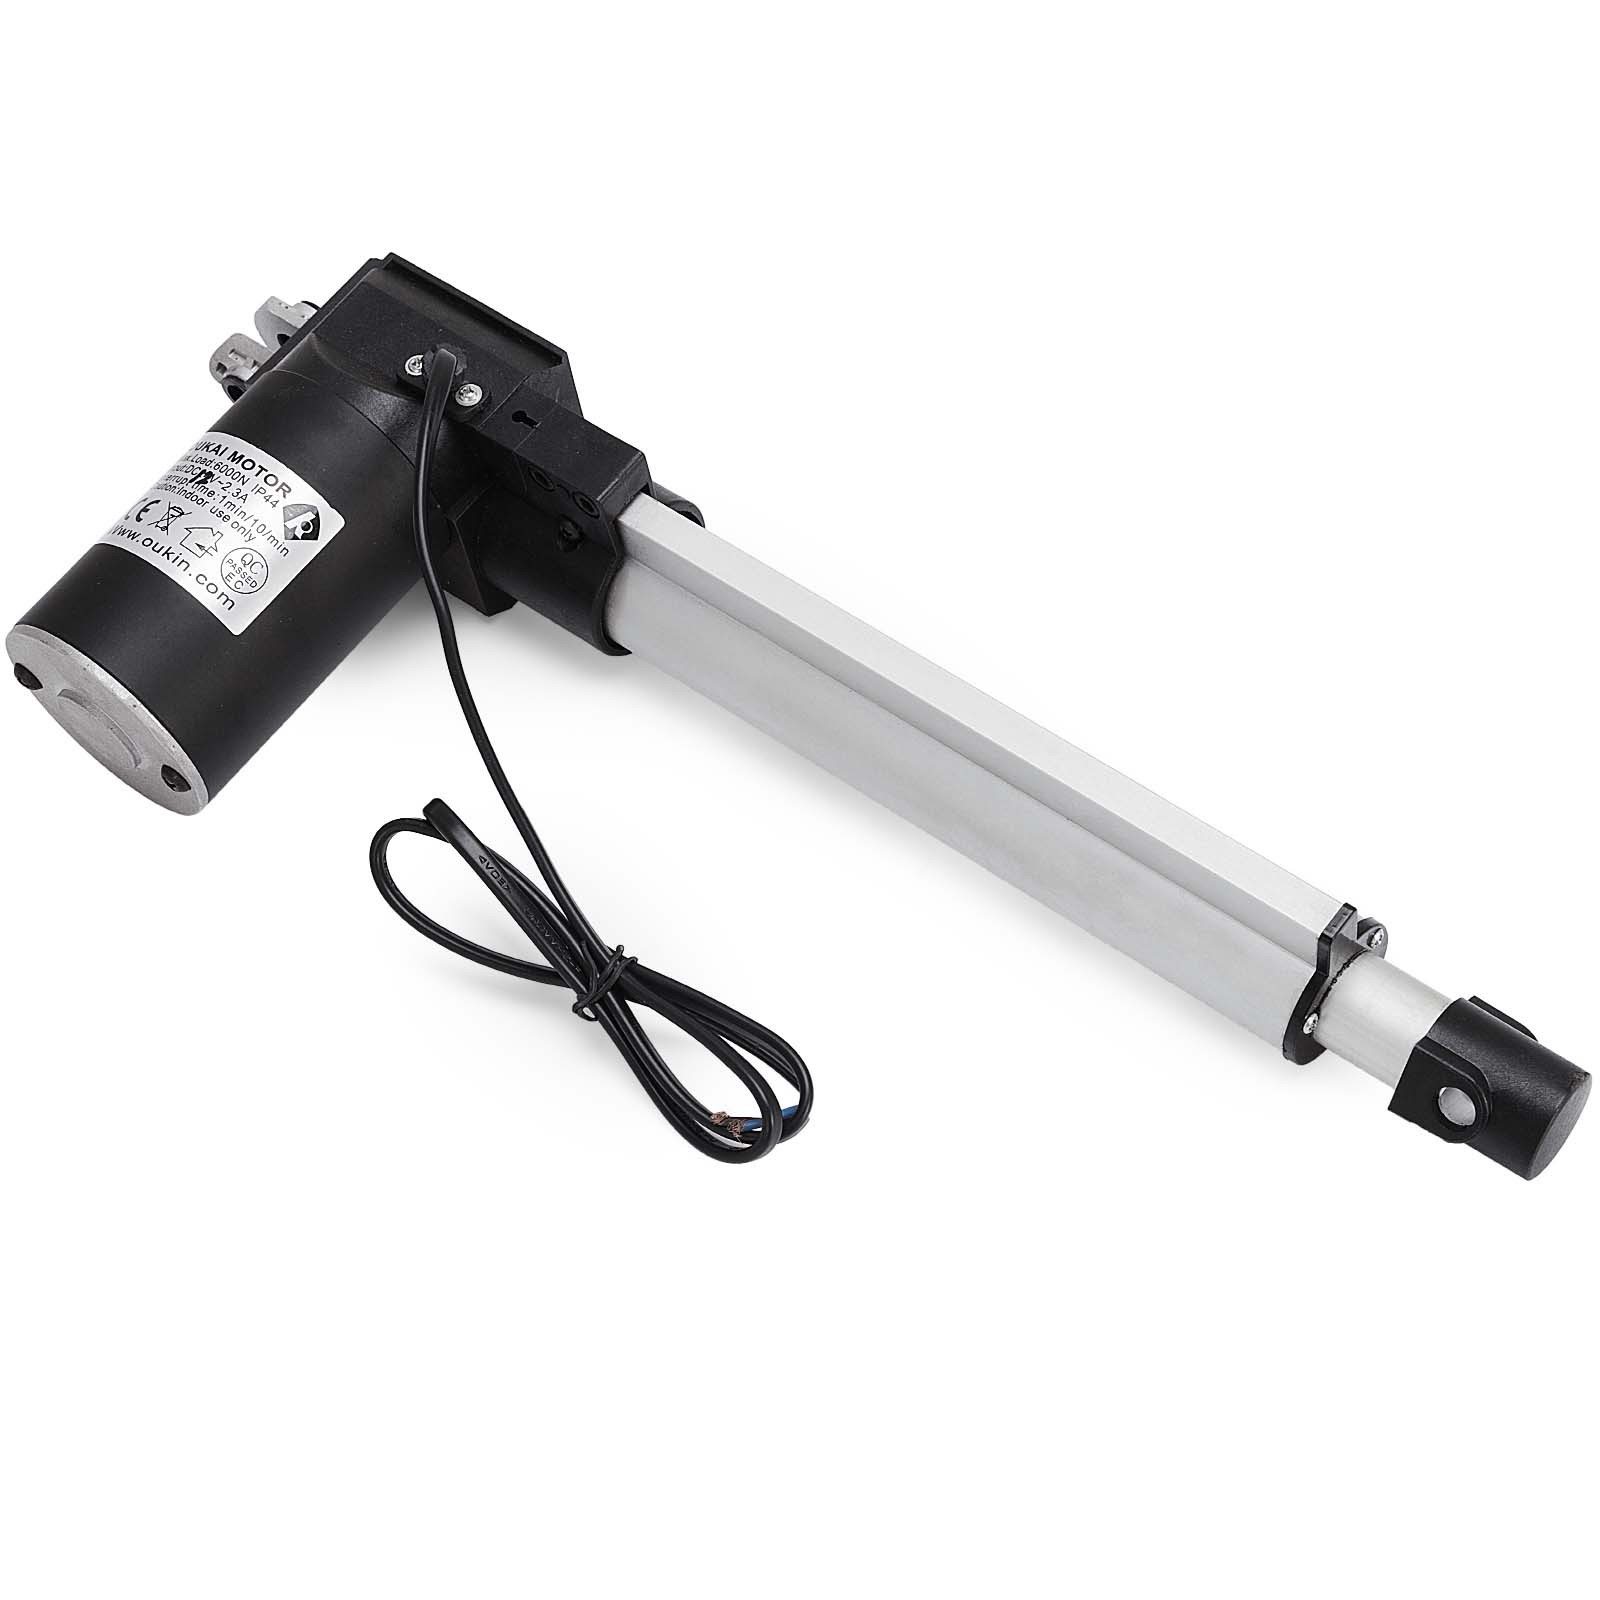 Linear Actuator 6000N DC 12V Motor Electric Hot Quiet FACTORY DIRECT BEST PRICE 